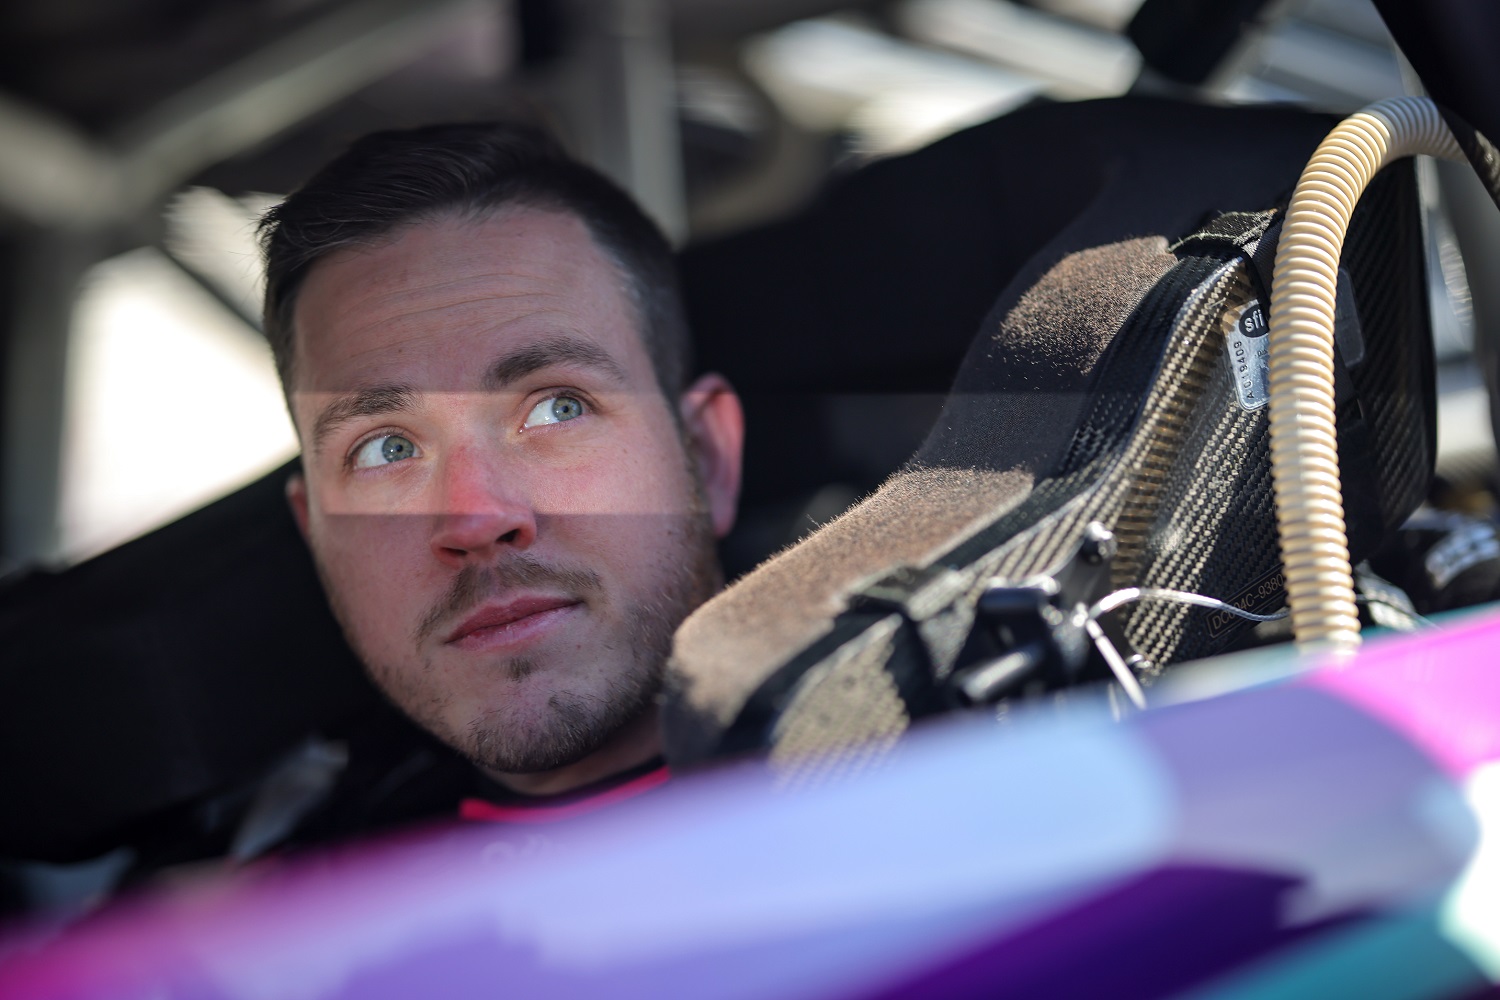 Alex Bowman sits in his car during qualifying for the NASCAR Cup Series Ambetter Health 400 at Atlanta Motor Speedway on March 18, 2023.